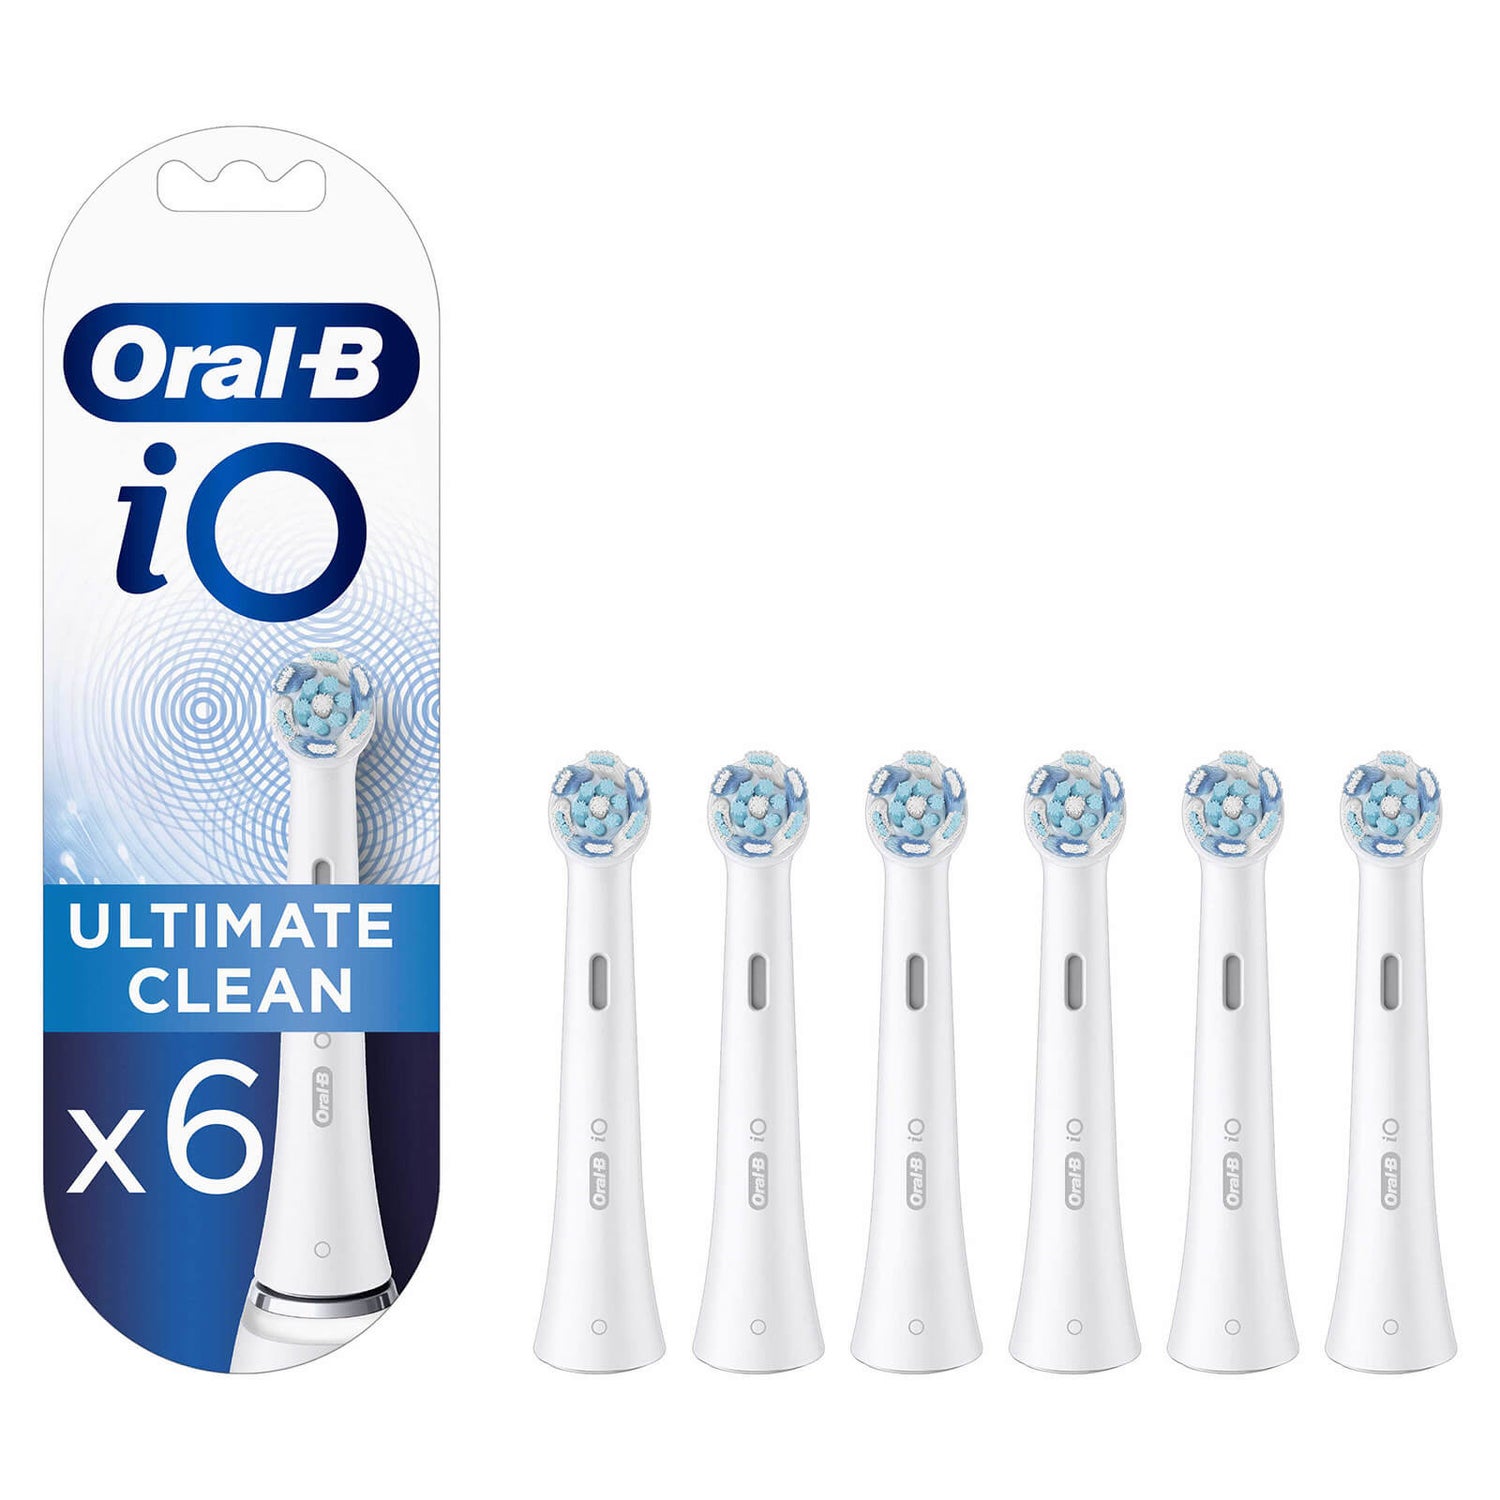 Oral-B iO Ultimate Clean Brush Heads, 6 Pieces